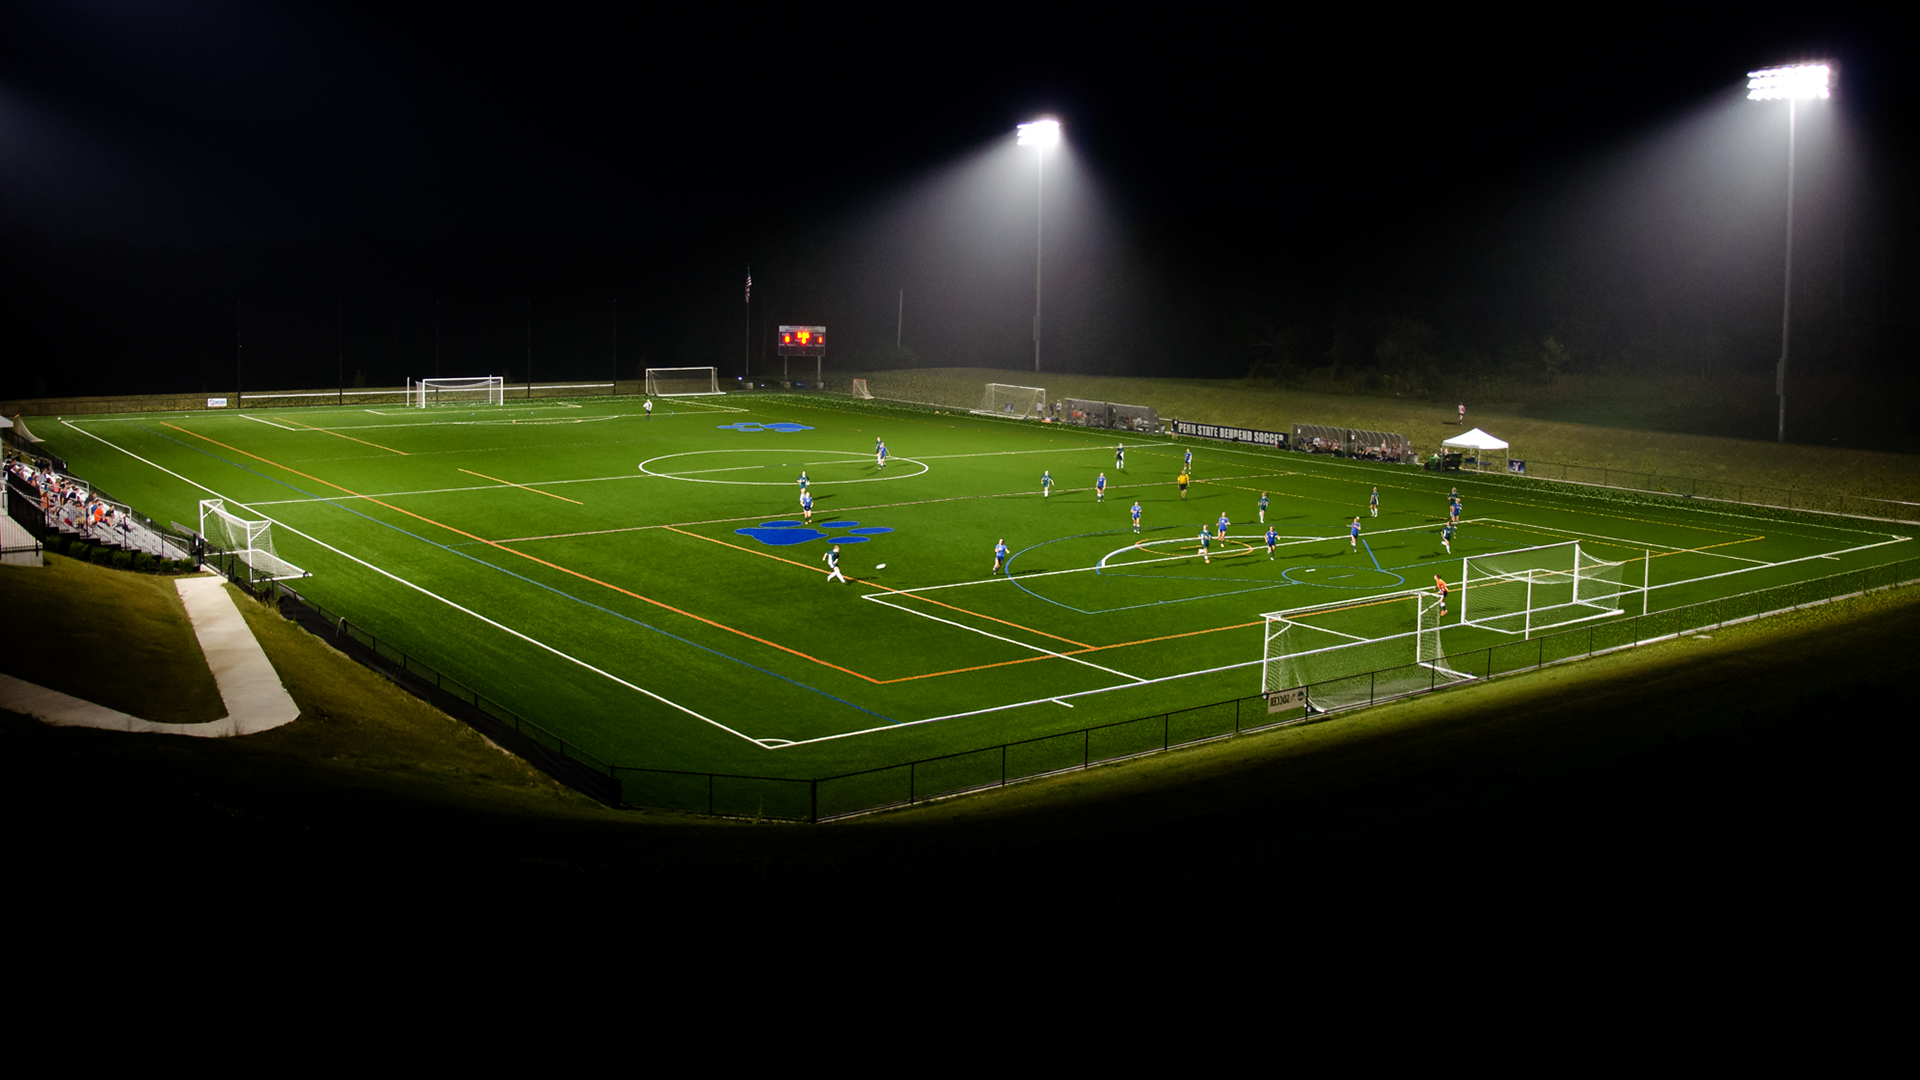 The soccer field at night